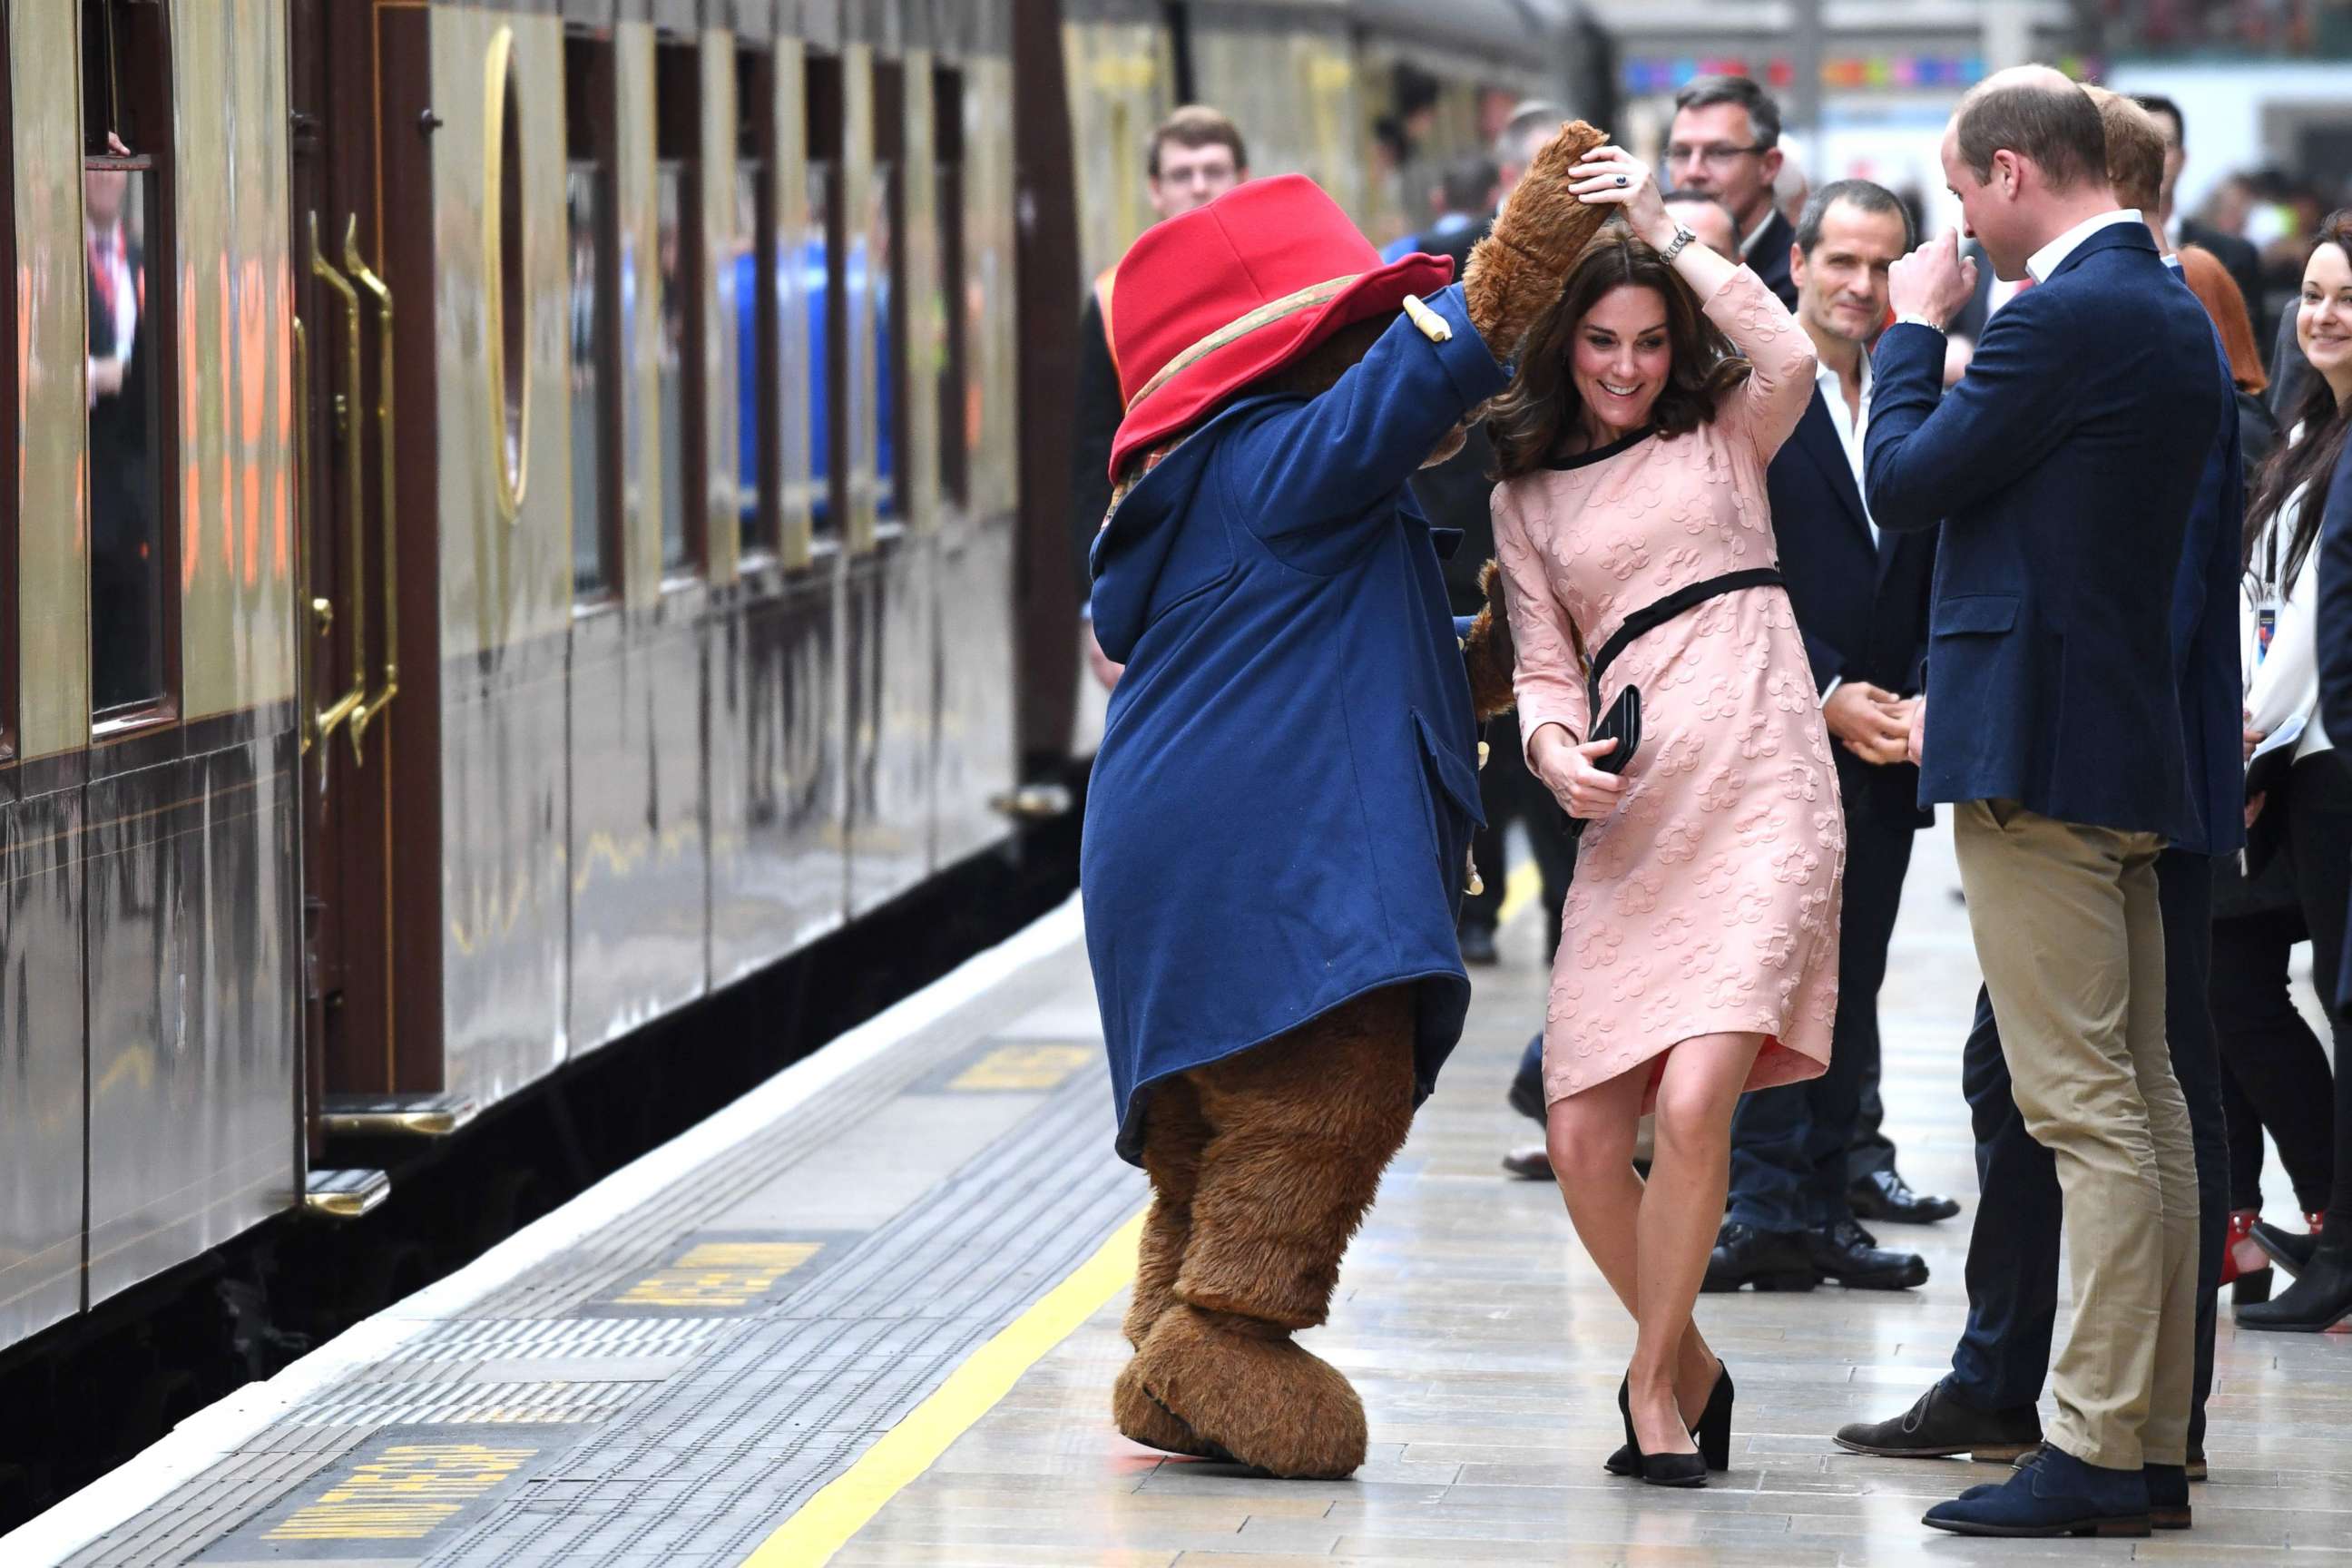 PHOTO: Britain's Catherine, Duchess of Cambridge, dances with a person in a Paddington Bear outfit by her husband Britain's Prince William, Duke of Cambridge as they attend a charities forum event at Paddington train station in London, Oct. 16, 2017.